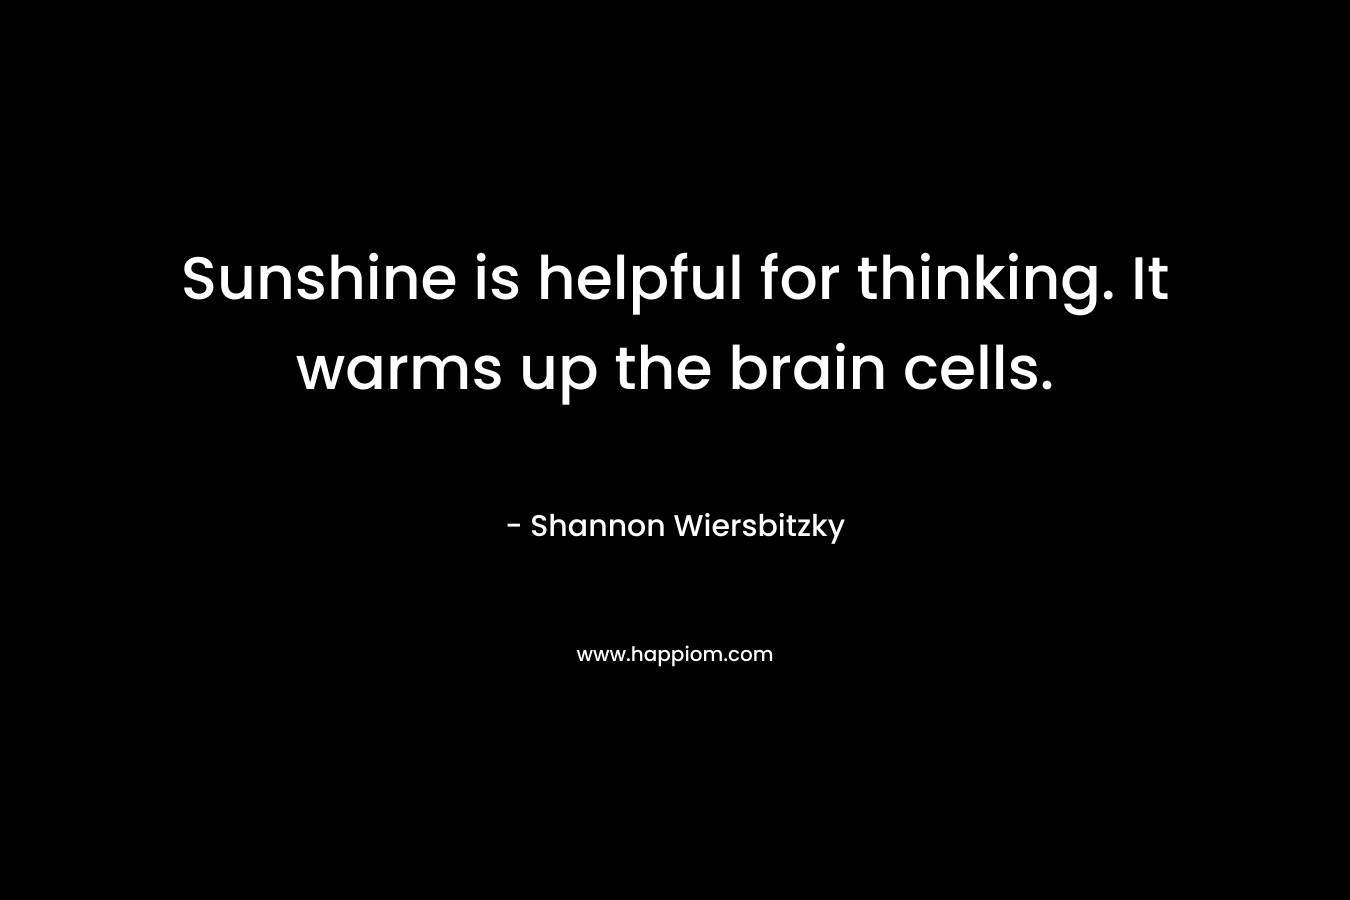 Sunshine is helpful for thinking. It warms up the brain cells.